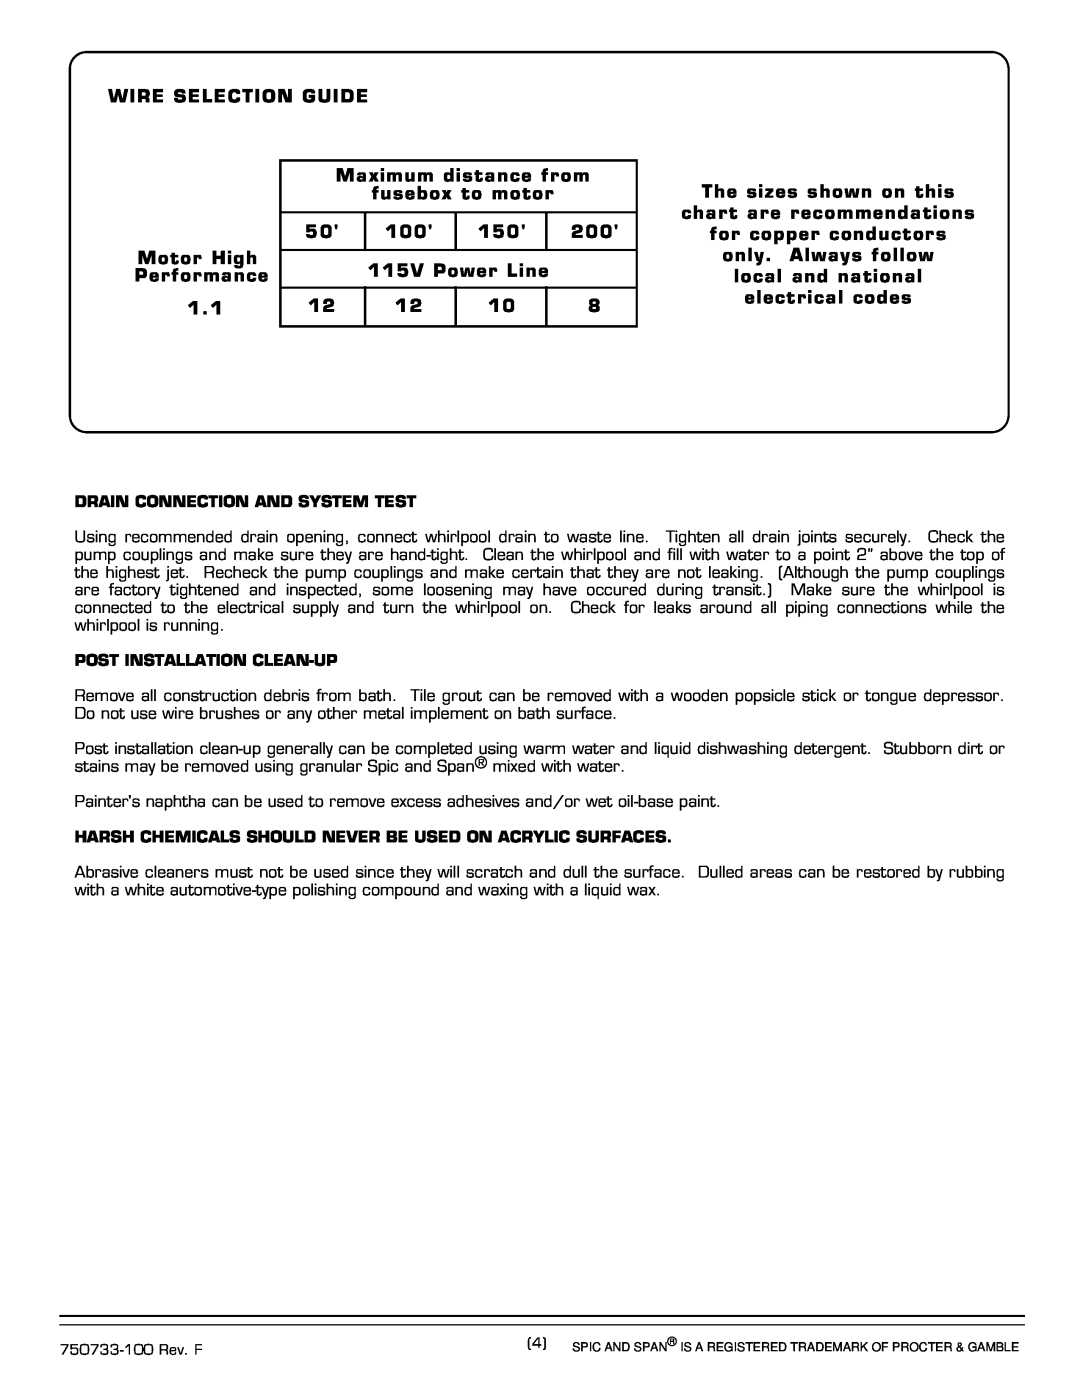 American Standard 2645 Series installation instructions Wire Selection Guide 